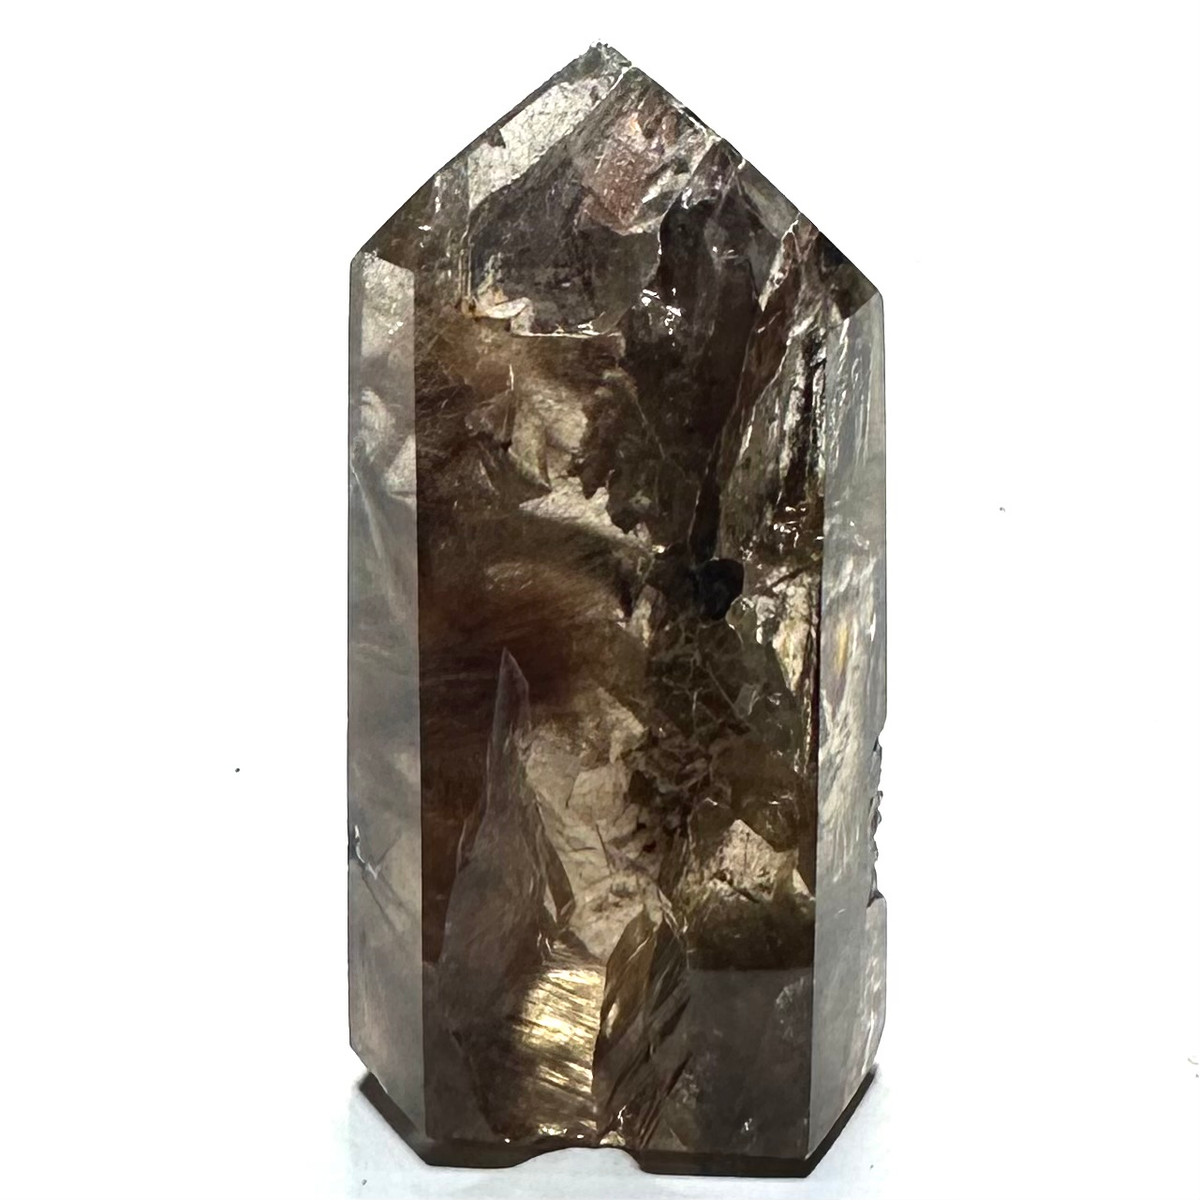 One of a Kind Rutilated Smokey Quartz with Rainbow Inclusions Tower-2 1/4 x 1"